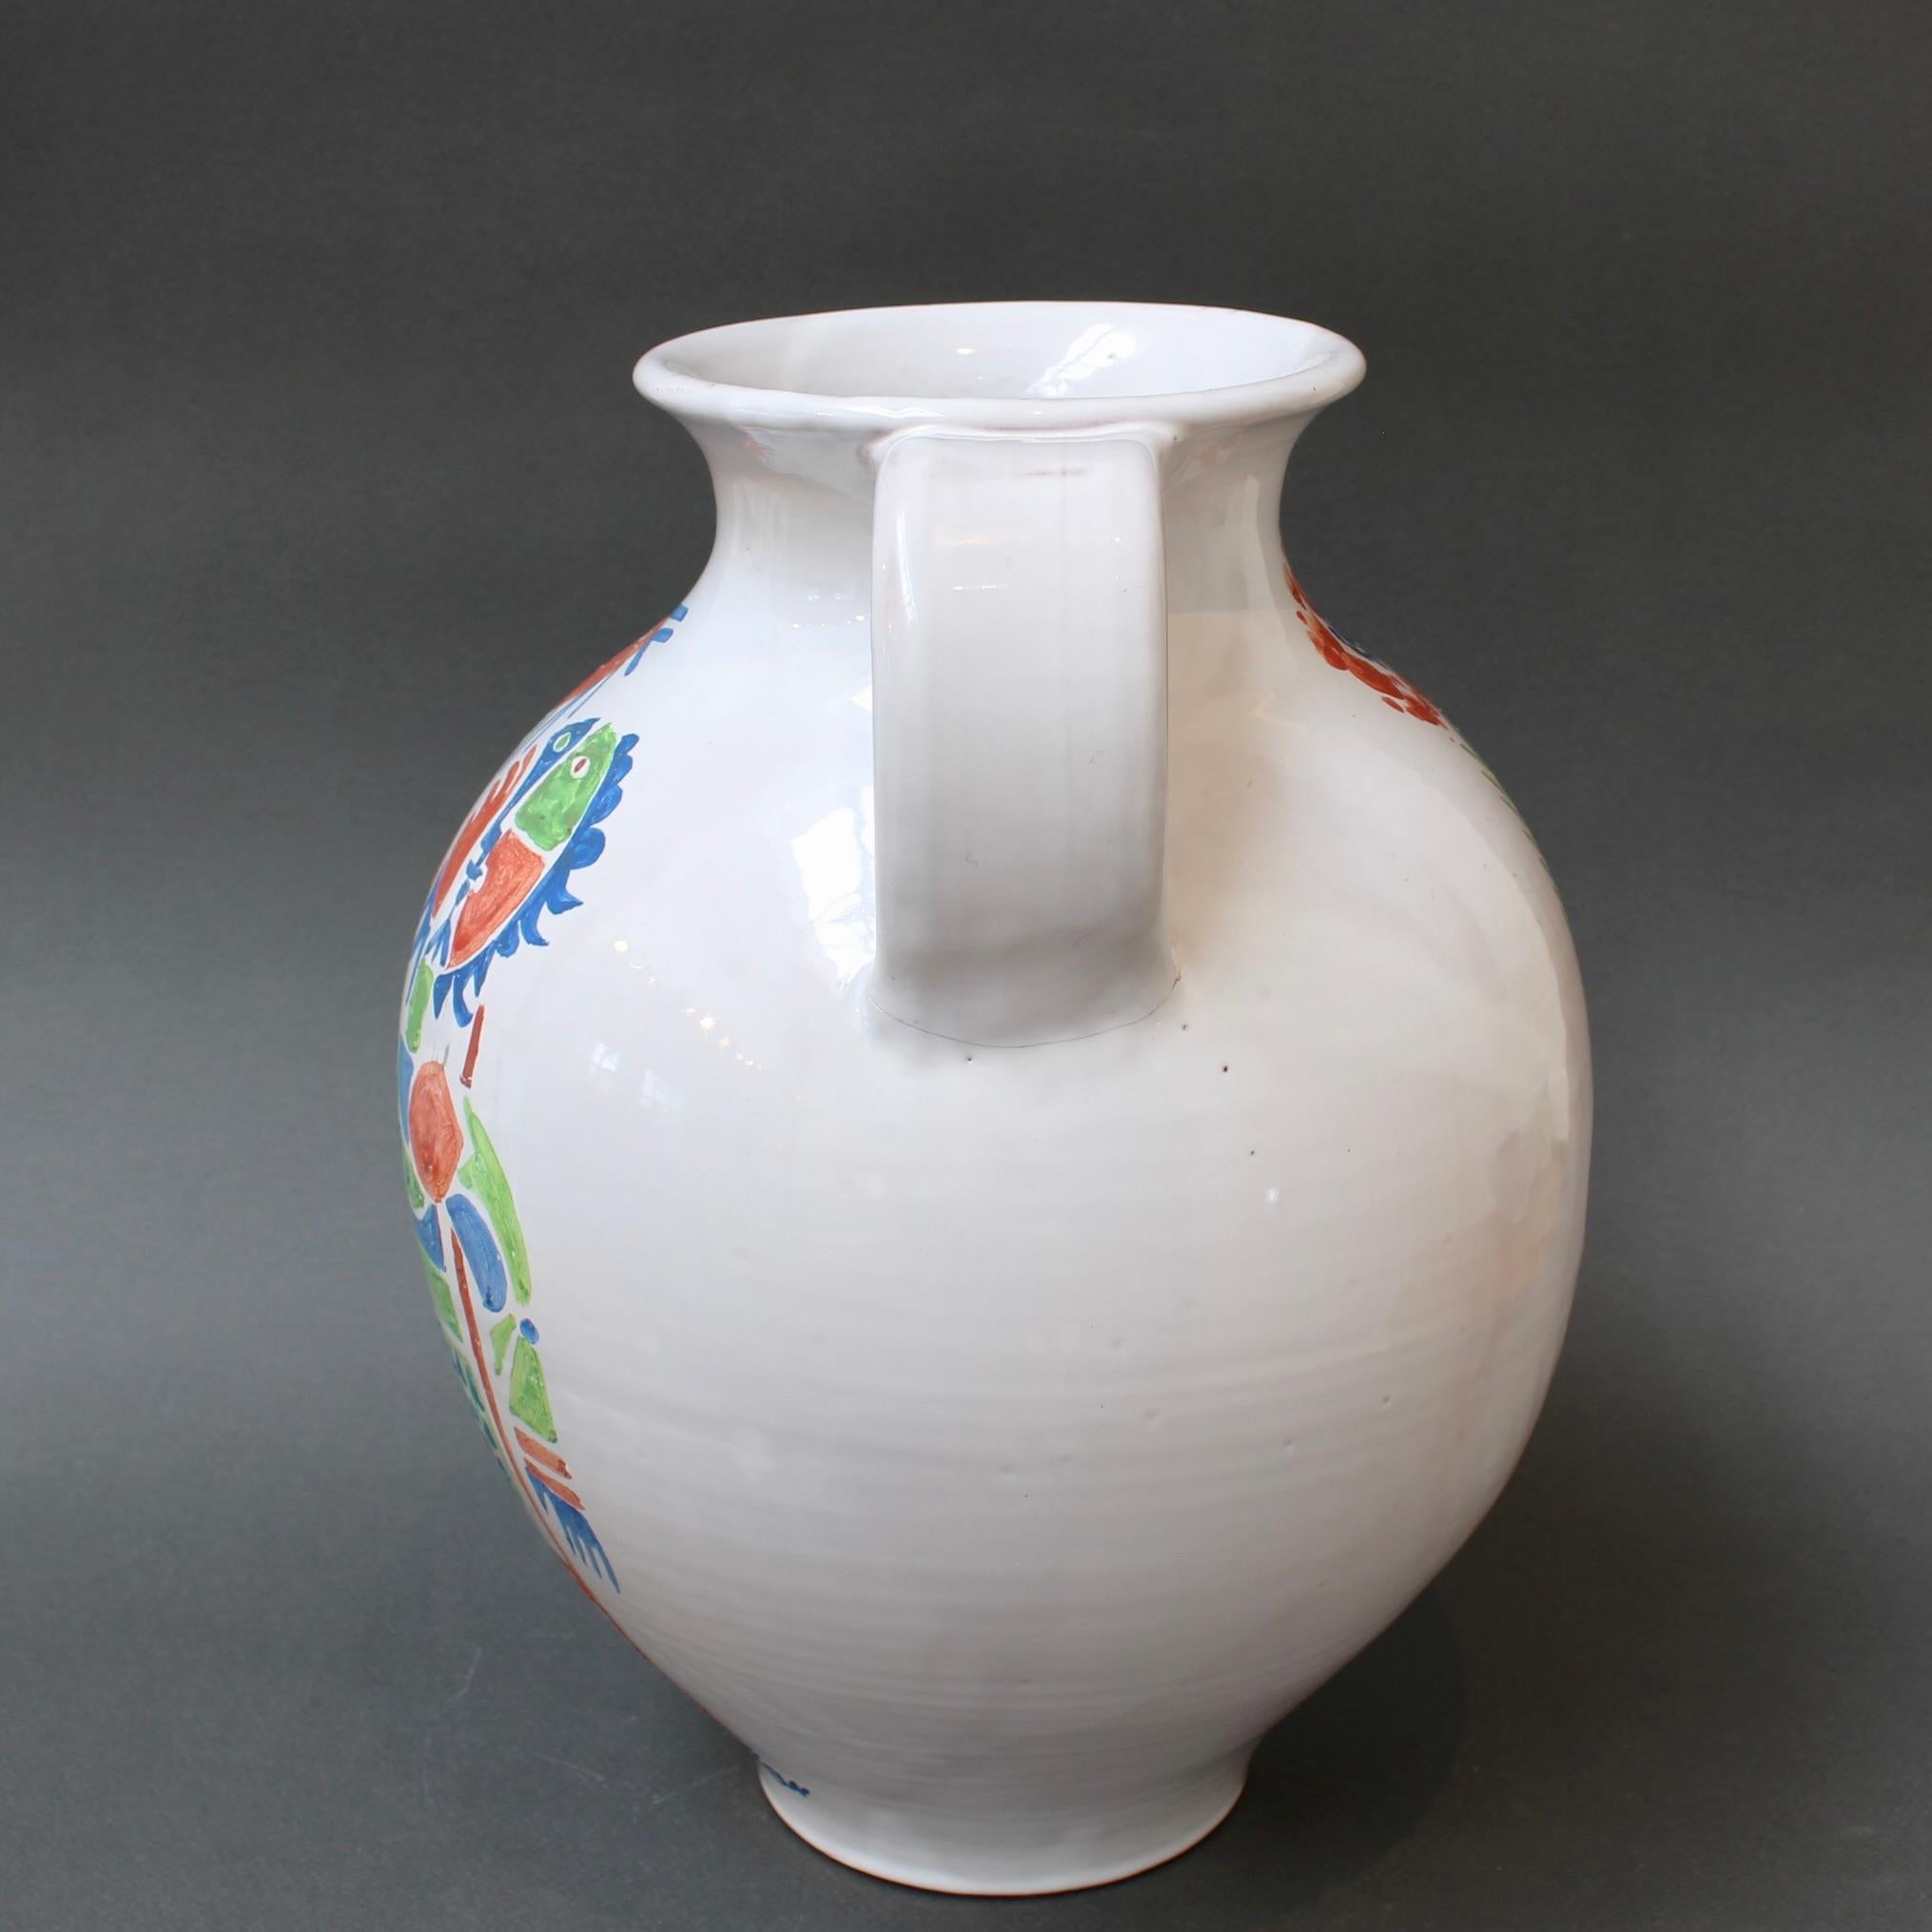 Vintage French Hand-Painted Ceramic Vase by Roger Capron (circa 1960s) In Good Condition For Sale In London, GB